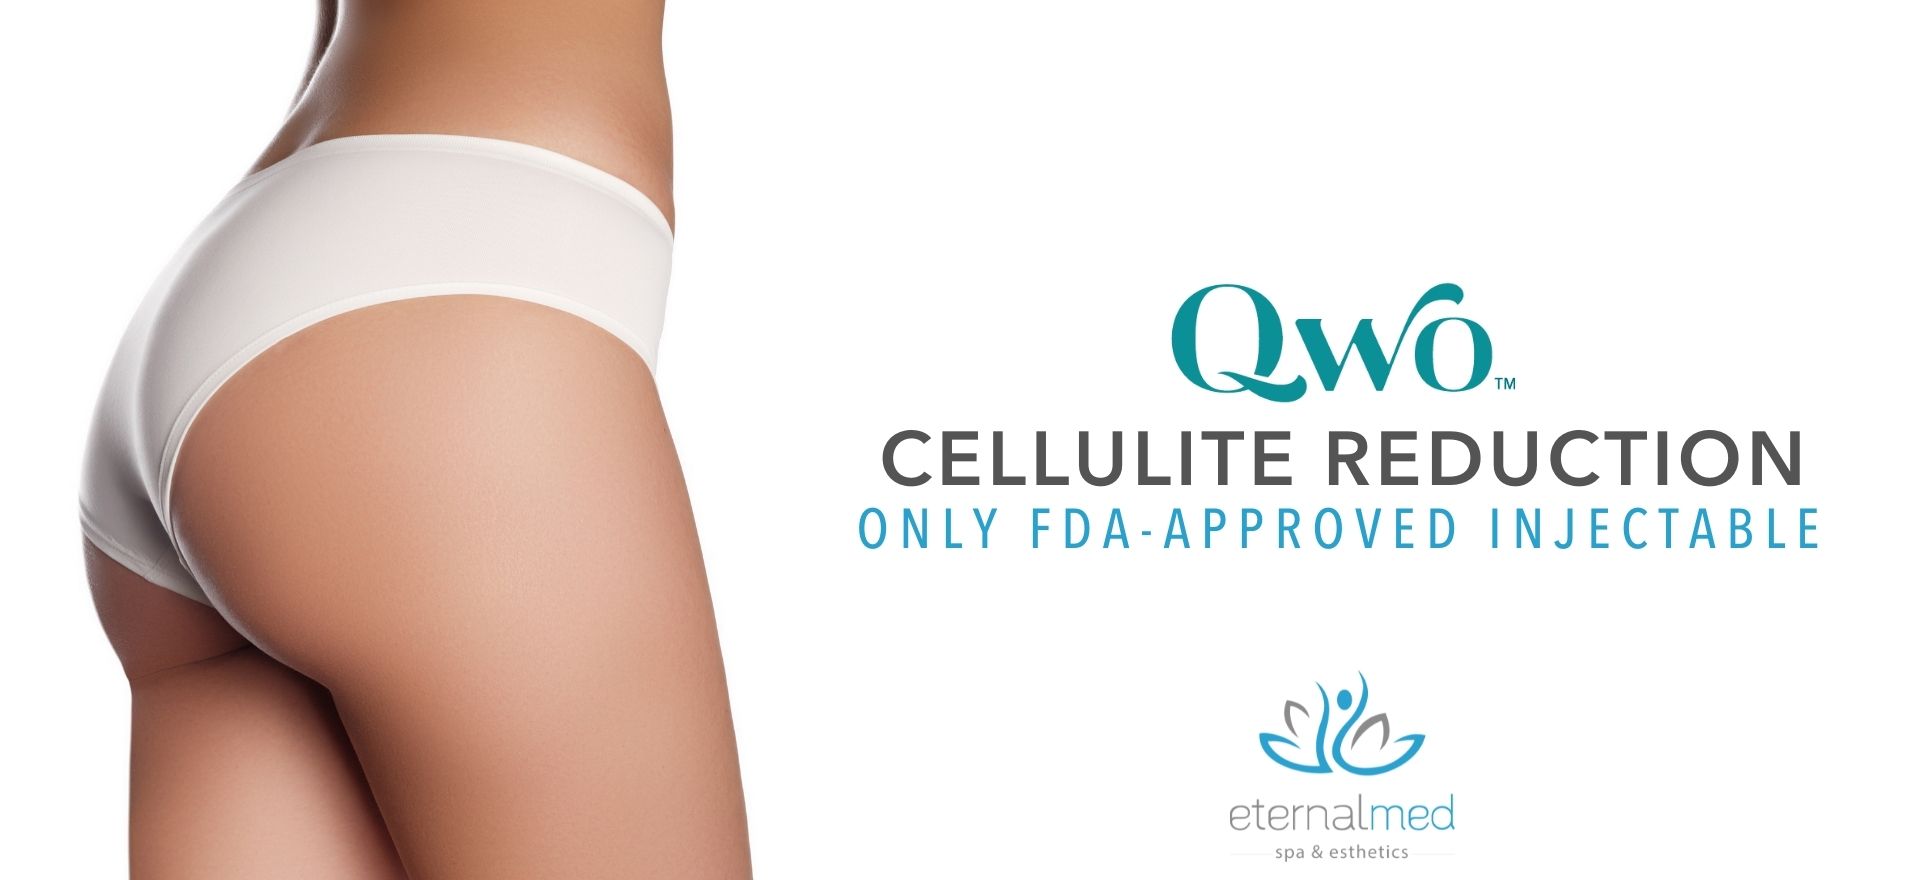 qwo cellulite reduction injectable treatment